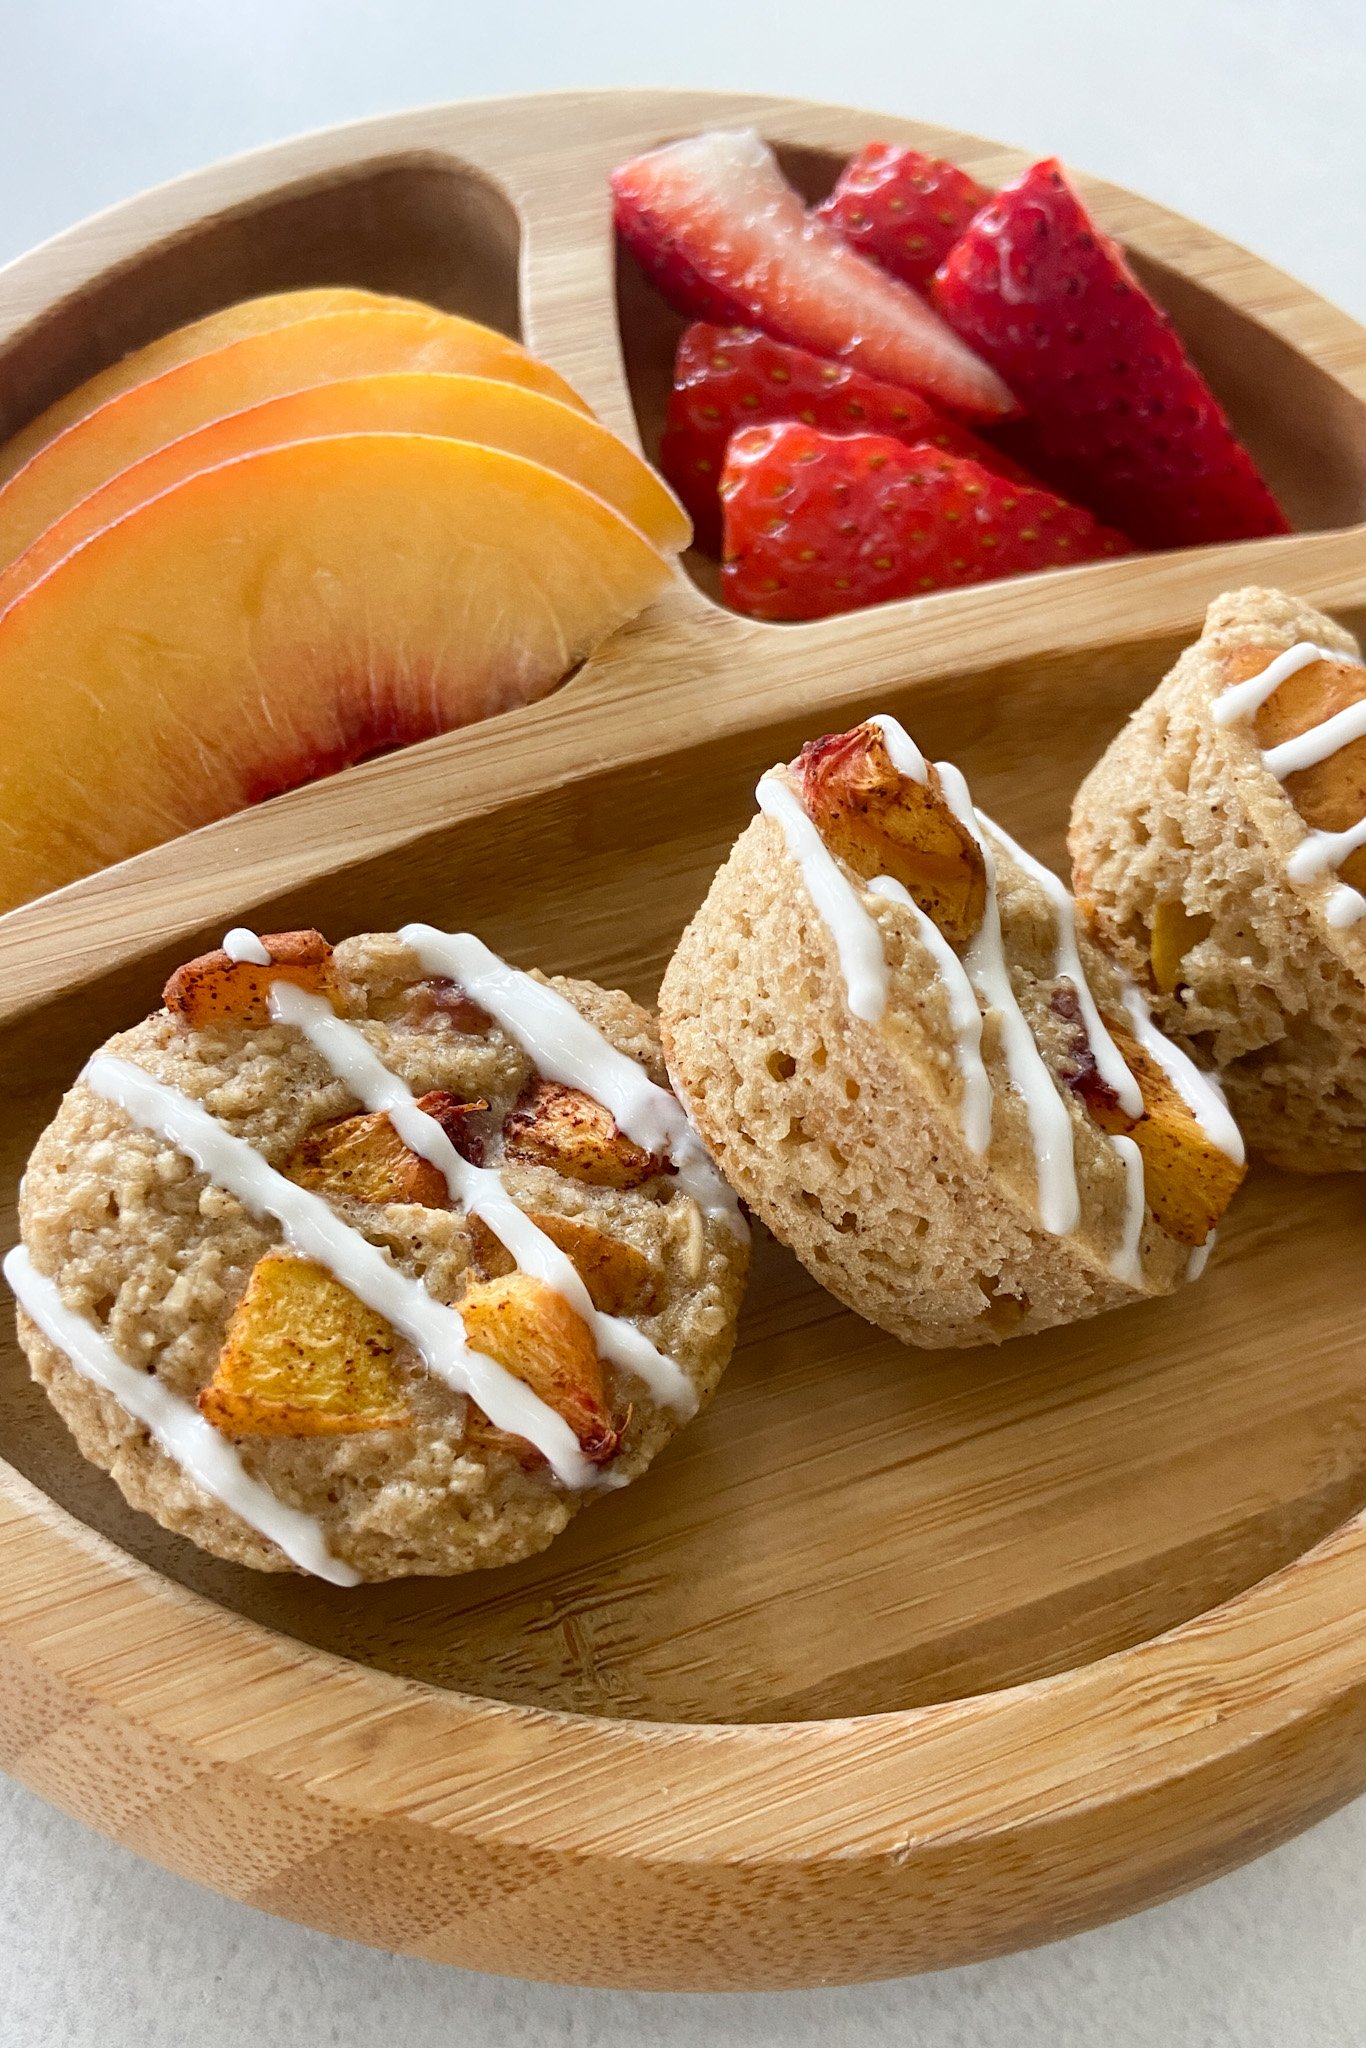 Peach cobbler muffins served with fruits.